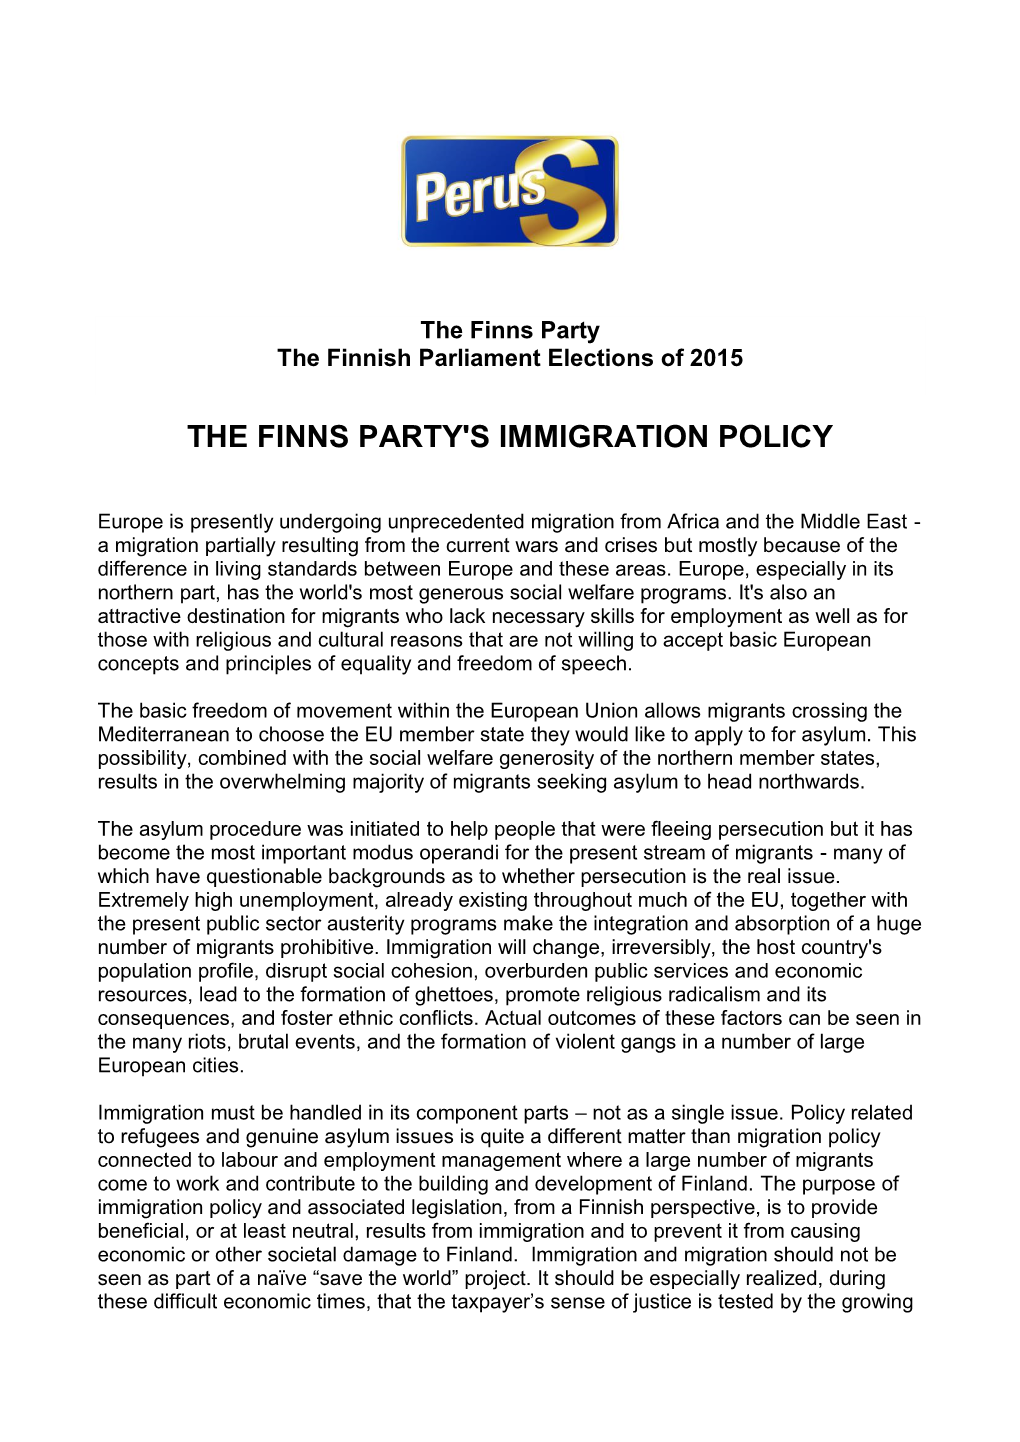 The Finns Party's Immigration Policy